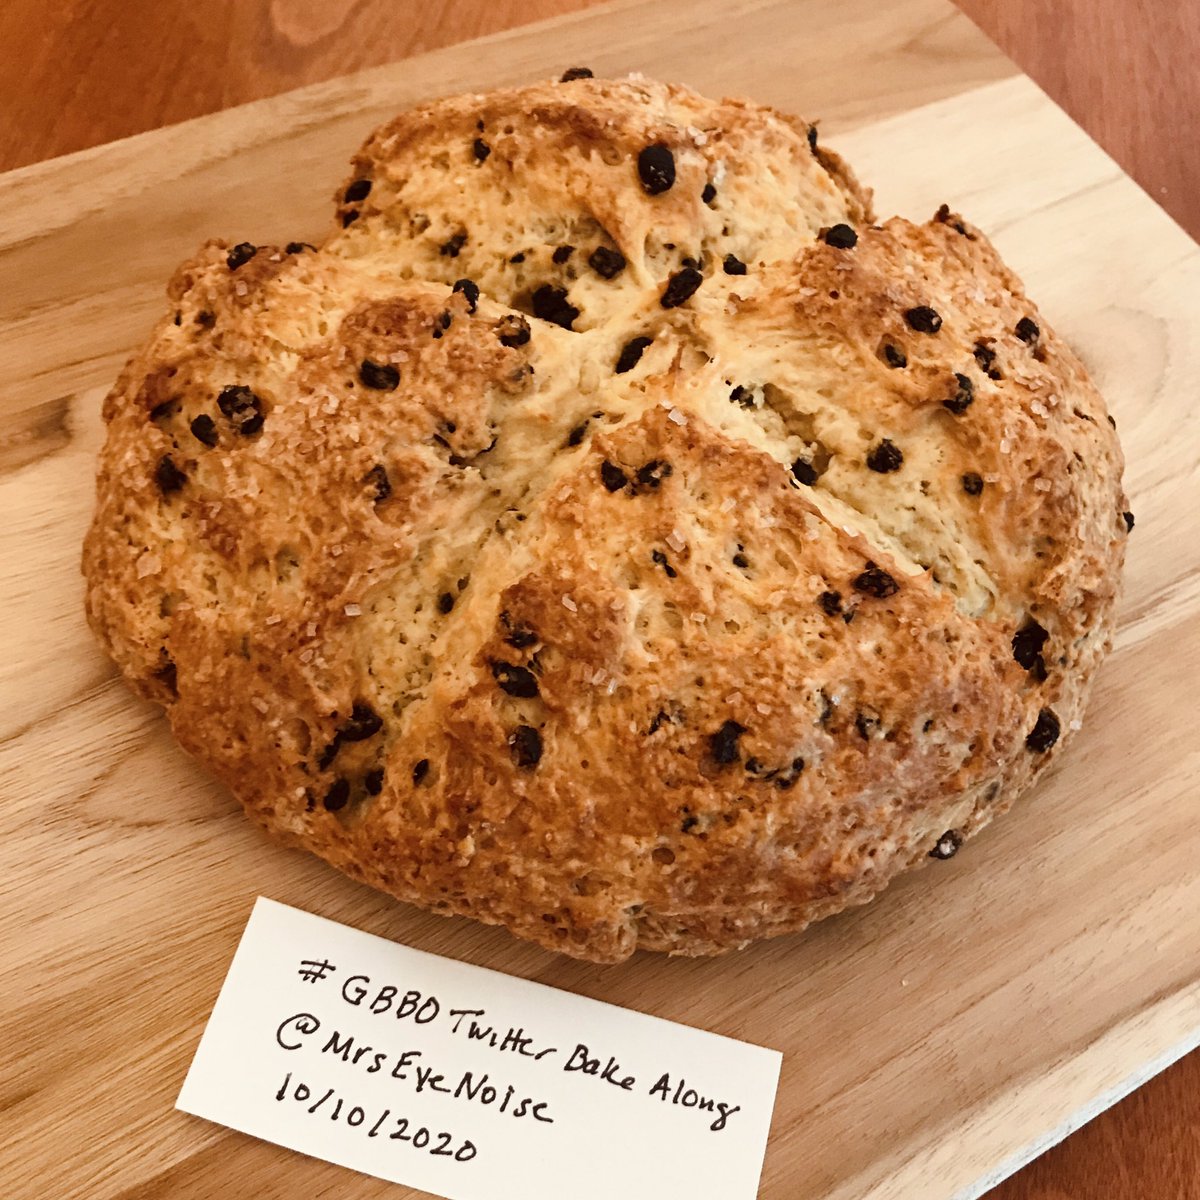 Round 1 of this week’s #GBBOTwitterBakeAlong is currant and orange soda bread @Rob_C_Allen @thebakingnanna1 #GBBO #breadweek